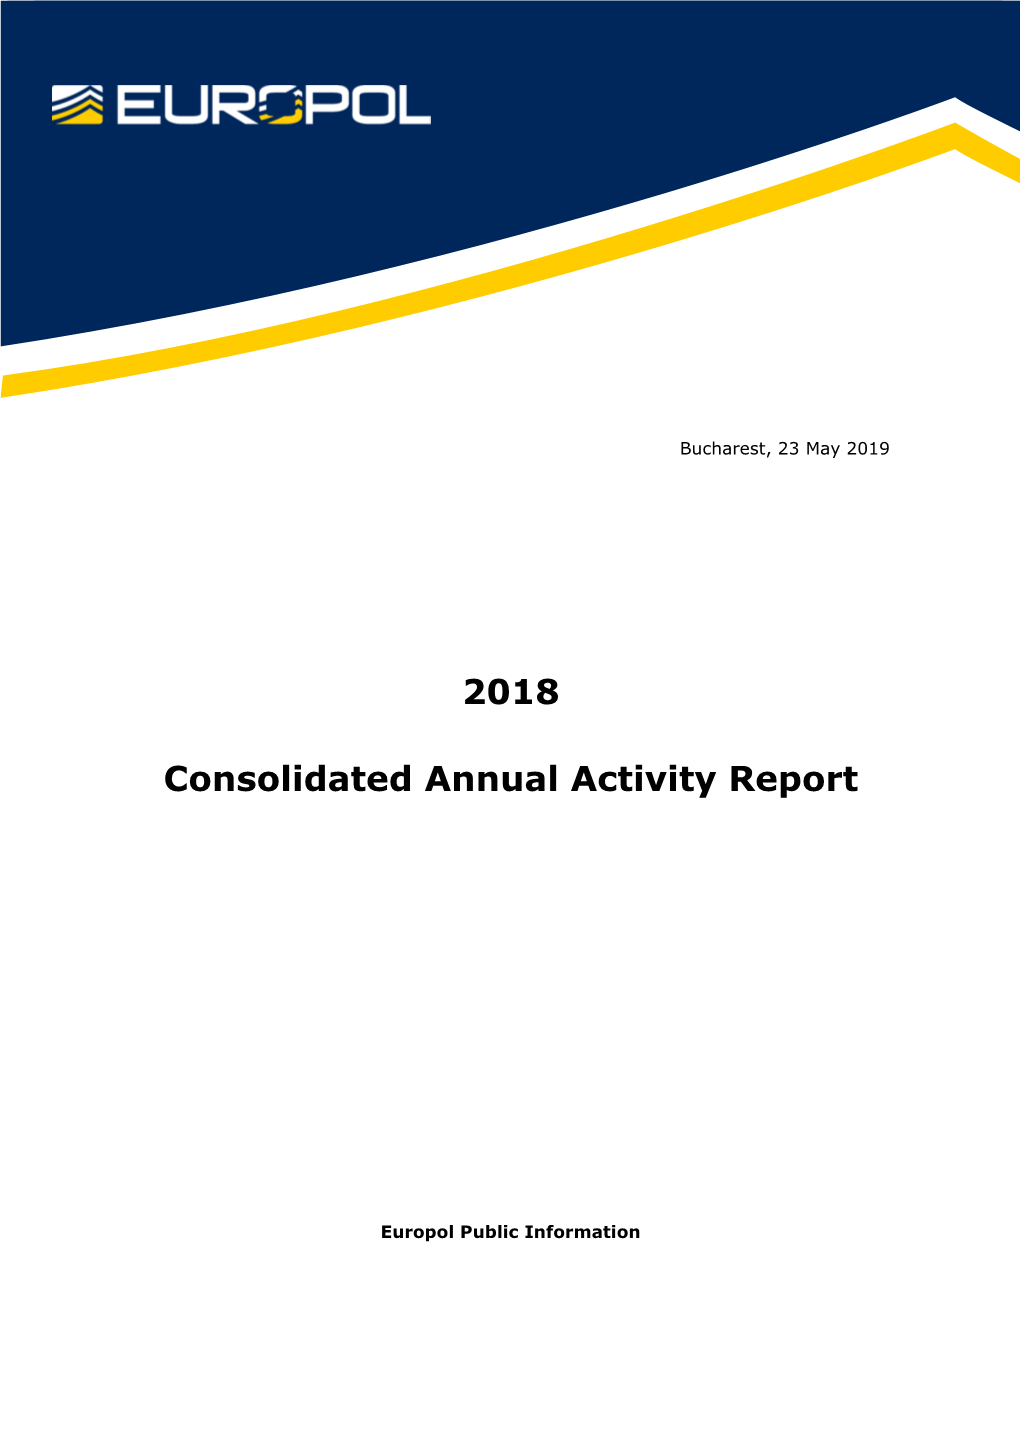 Consolidated Annual Activity Report (CAAR) 2018